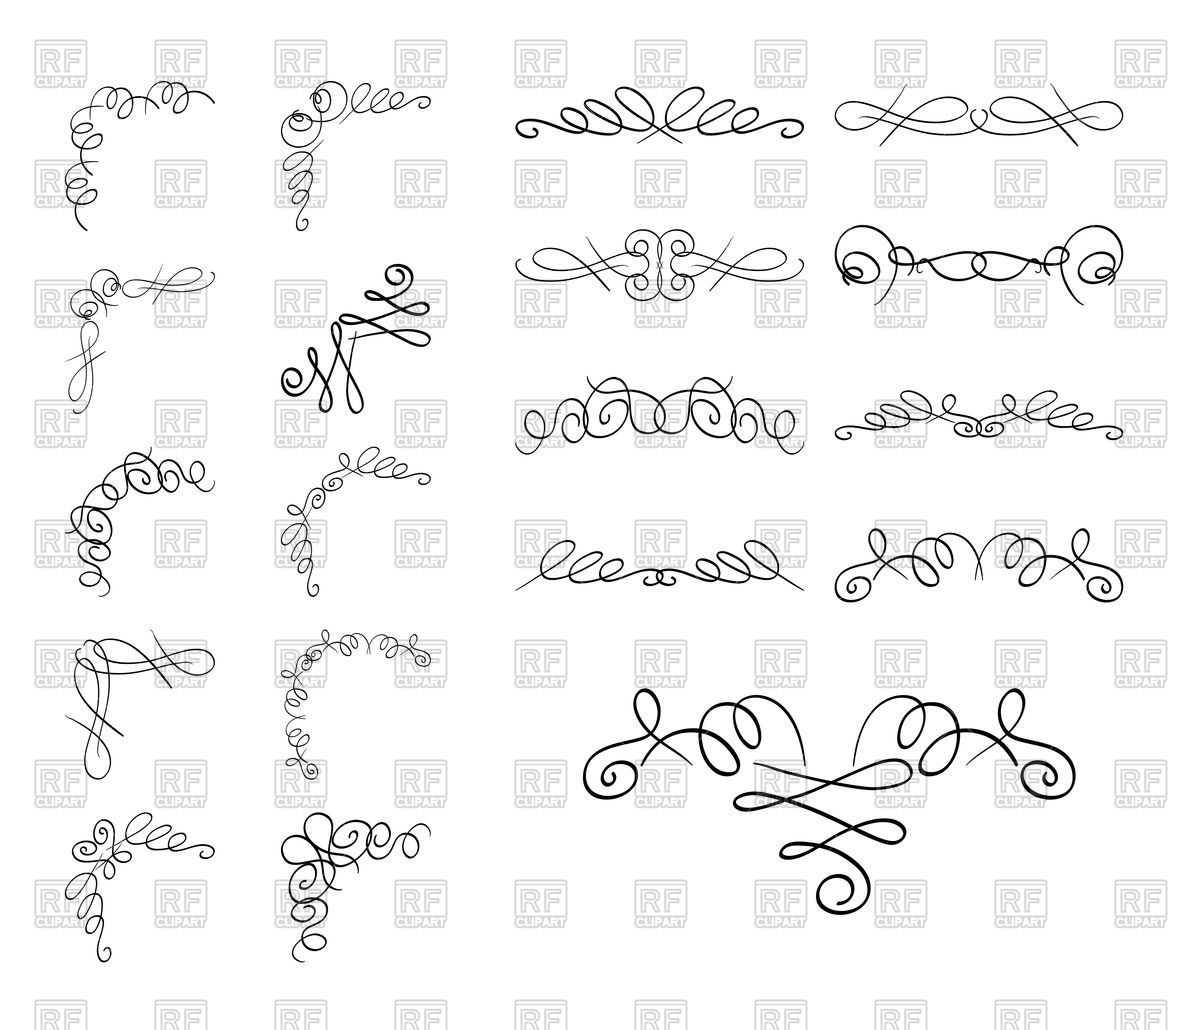 Curly Borders And Corners 77169 Download Royalty Free Vector Clipart